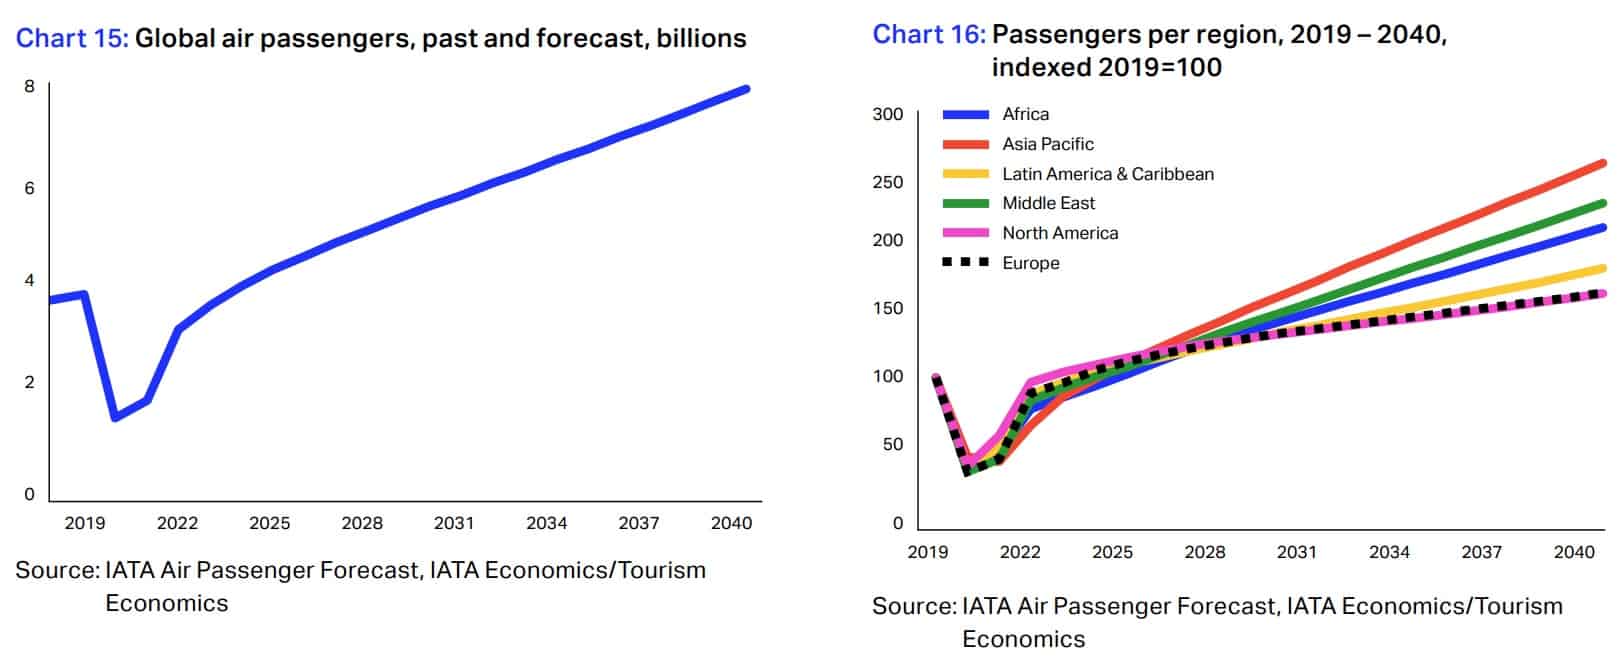 A chart showing global passenger forecasts up until 2040